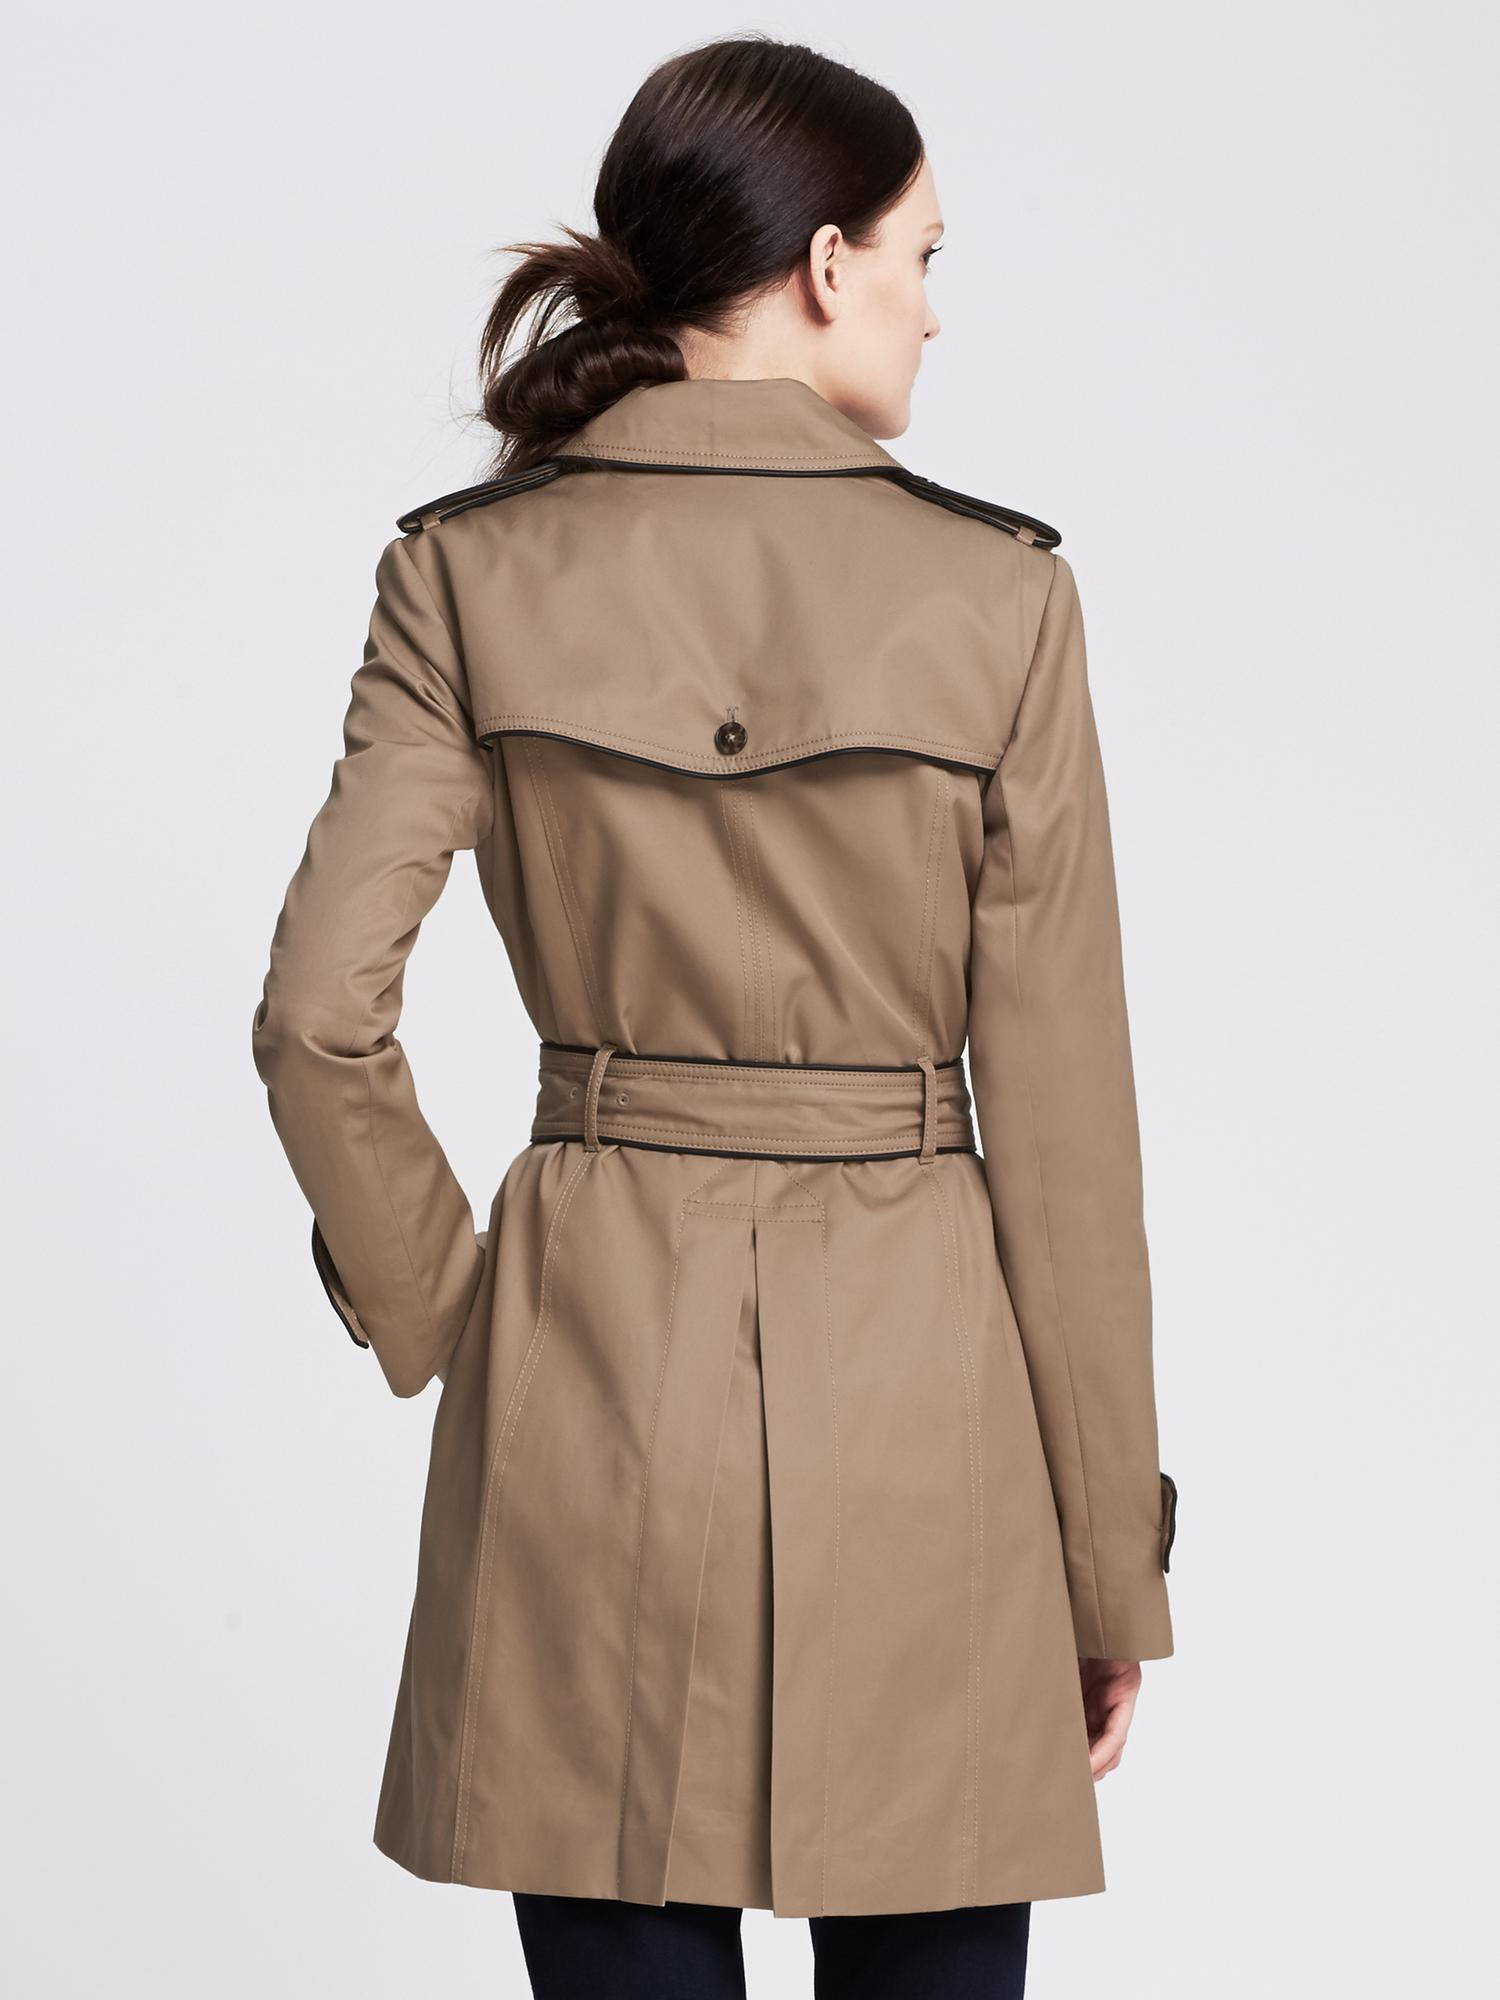 Banana Republic Piped Trench in Natural - Lyst